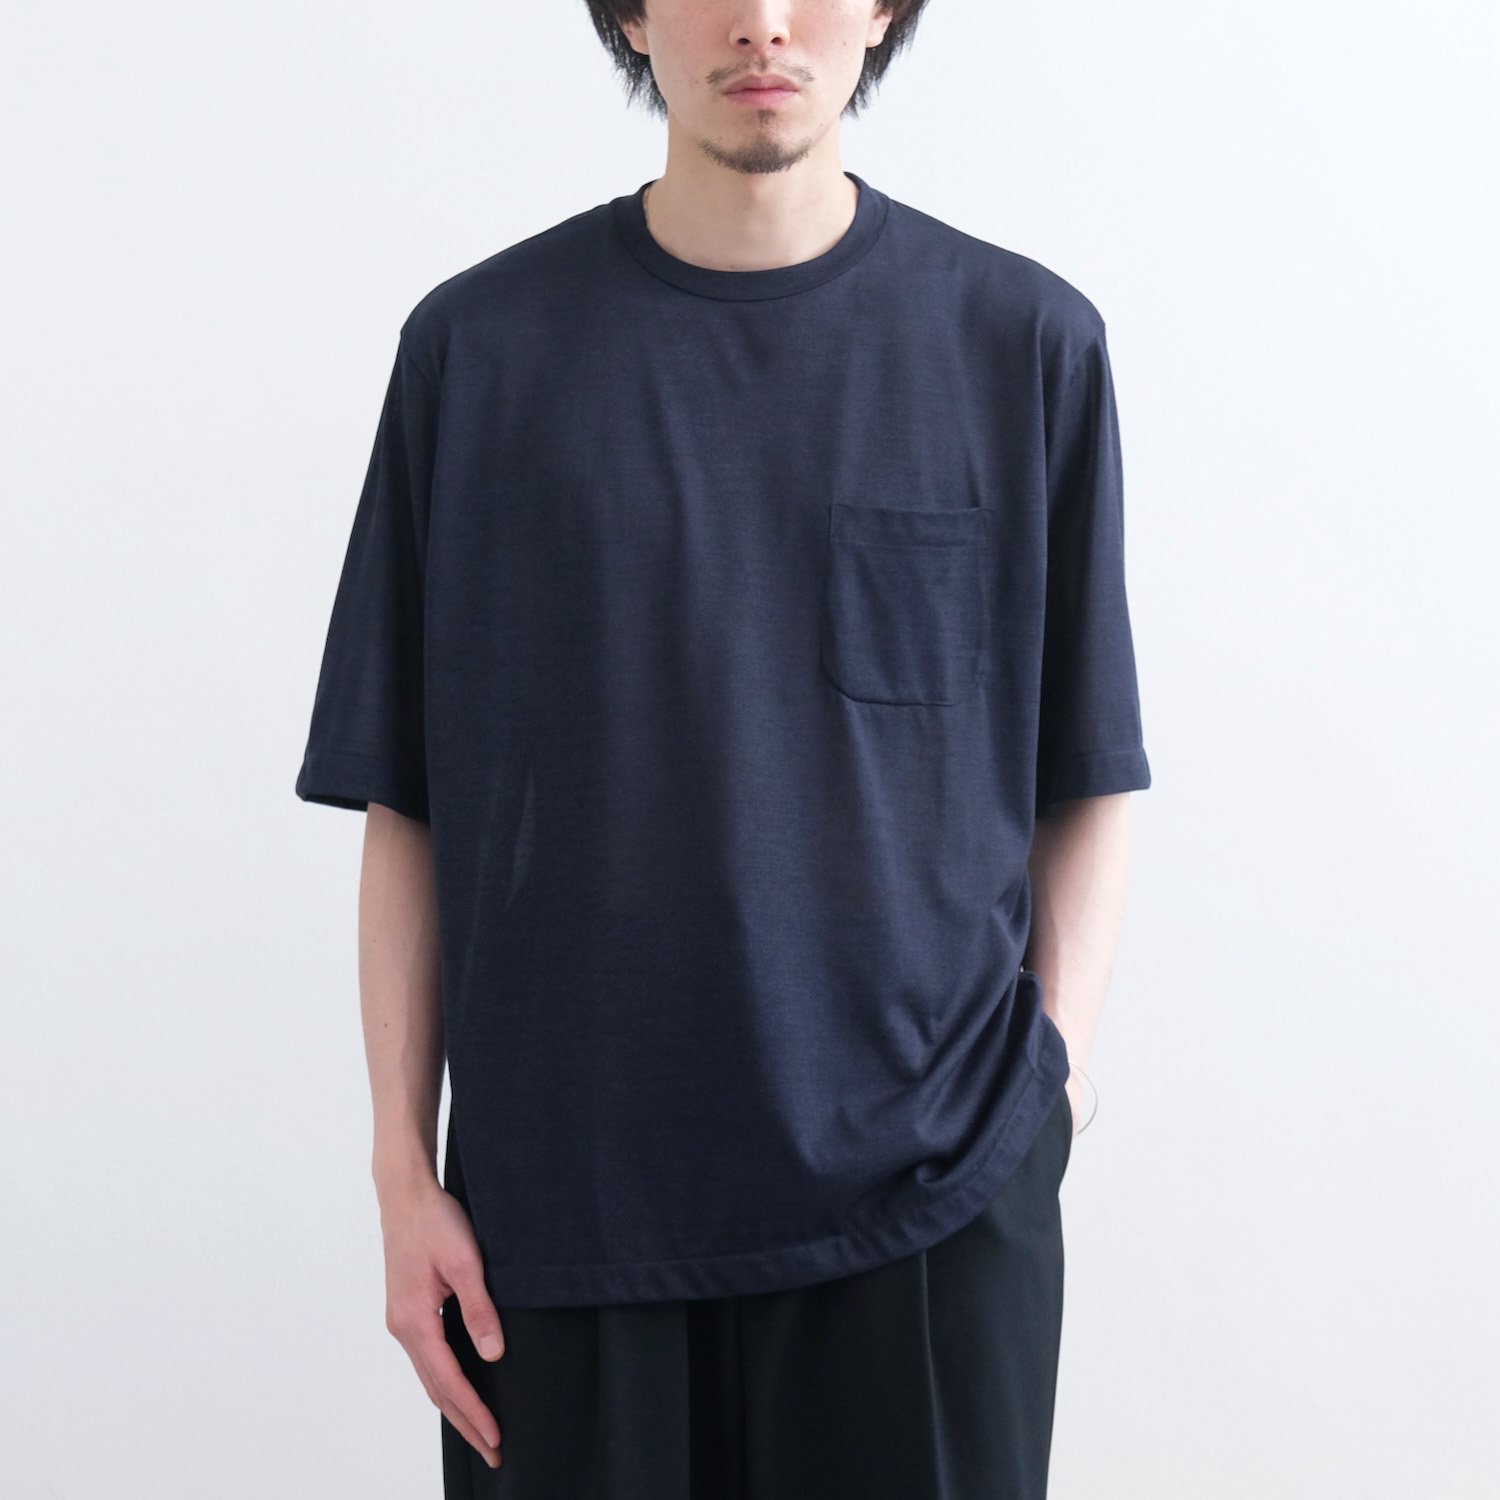 MAATEE&SONS WASHABLE SILK BOAT NECK - Tシャツ/カットソー(七分/長袖)